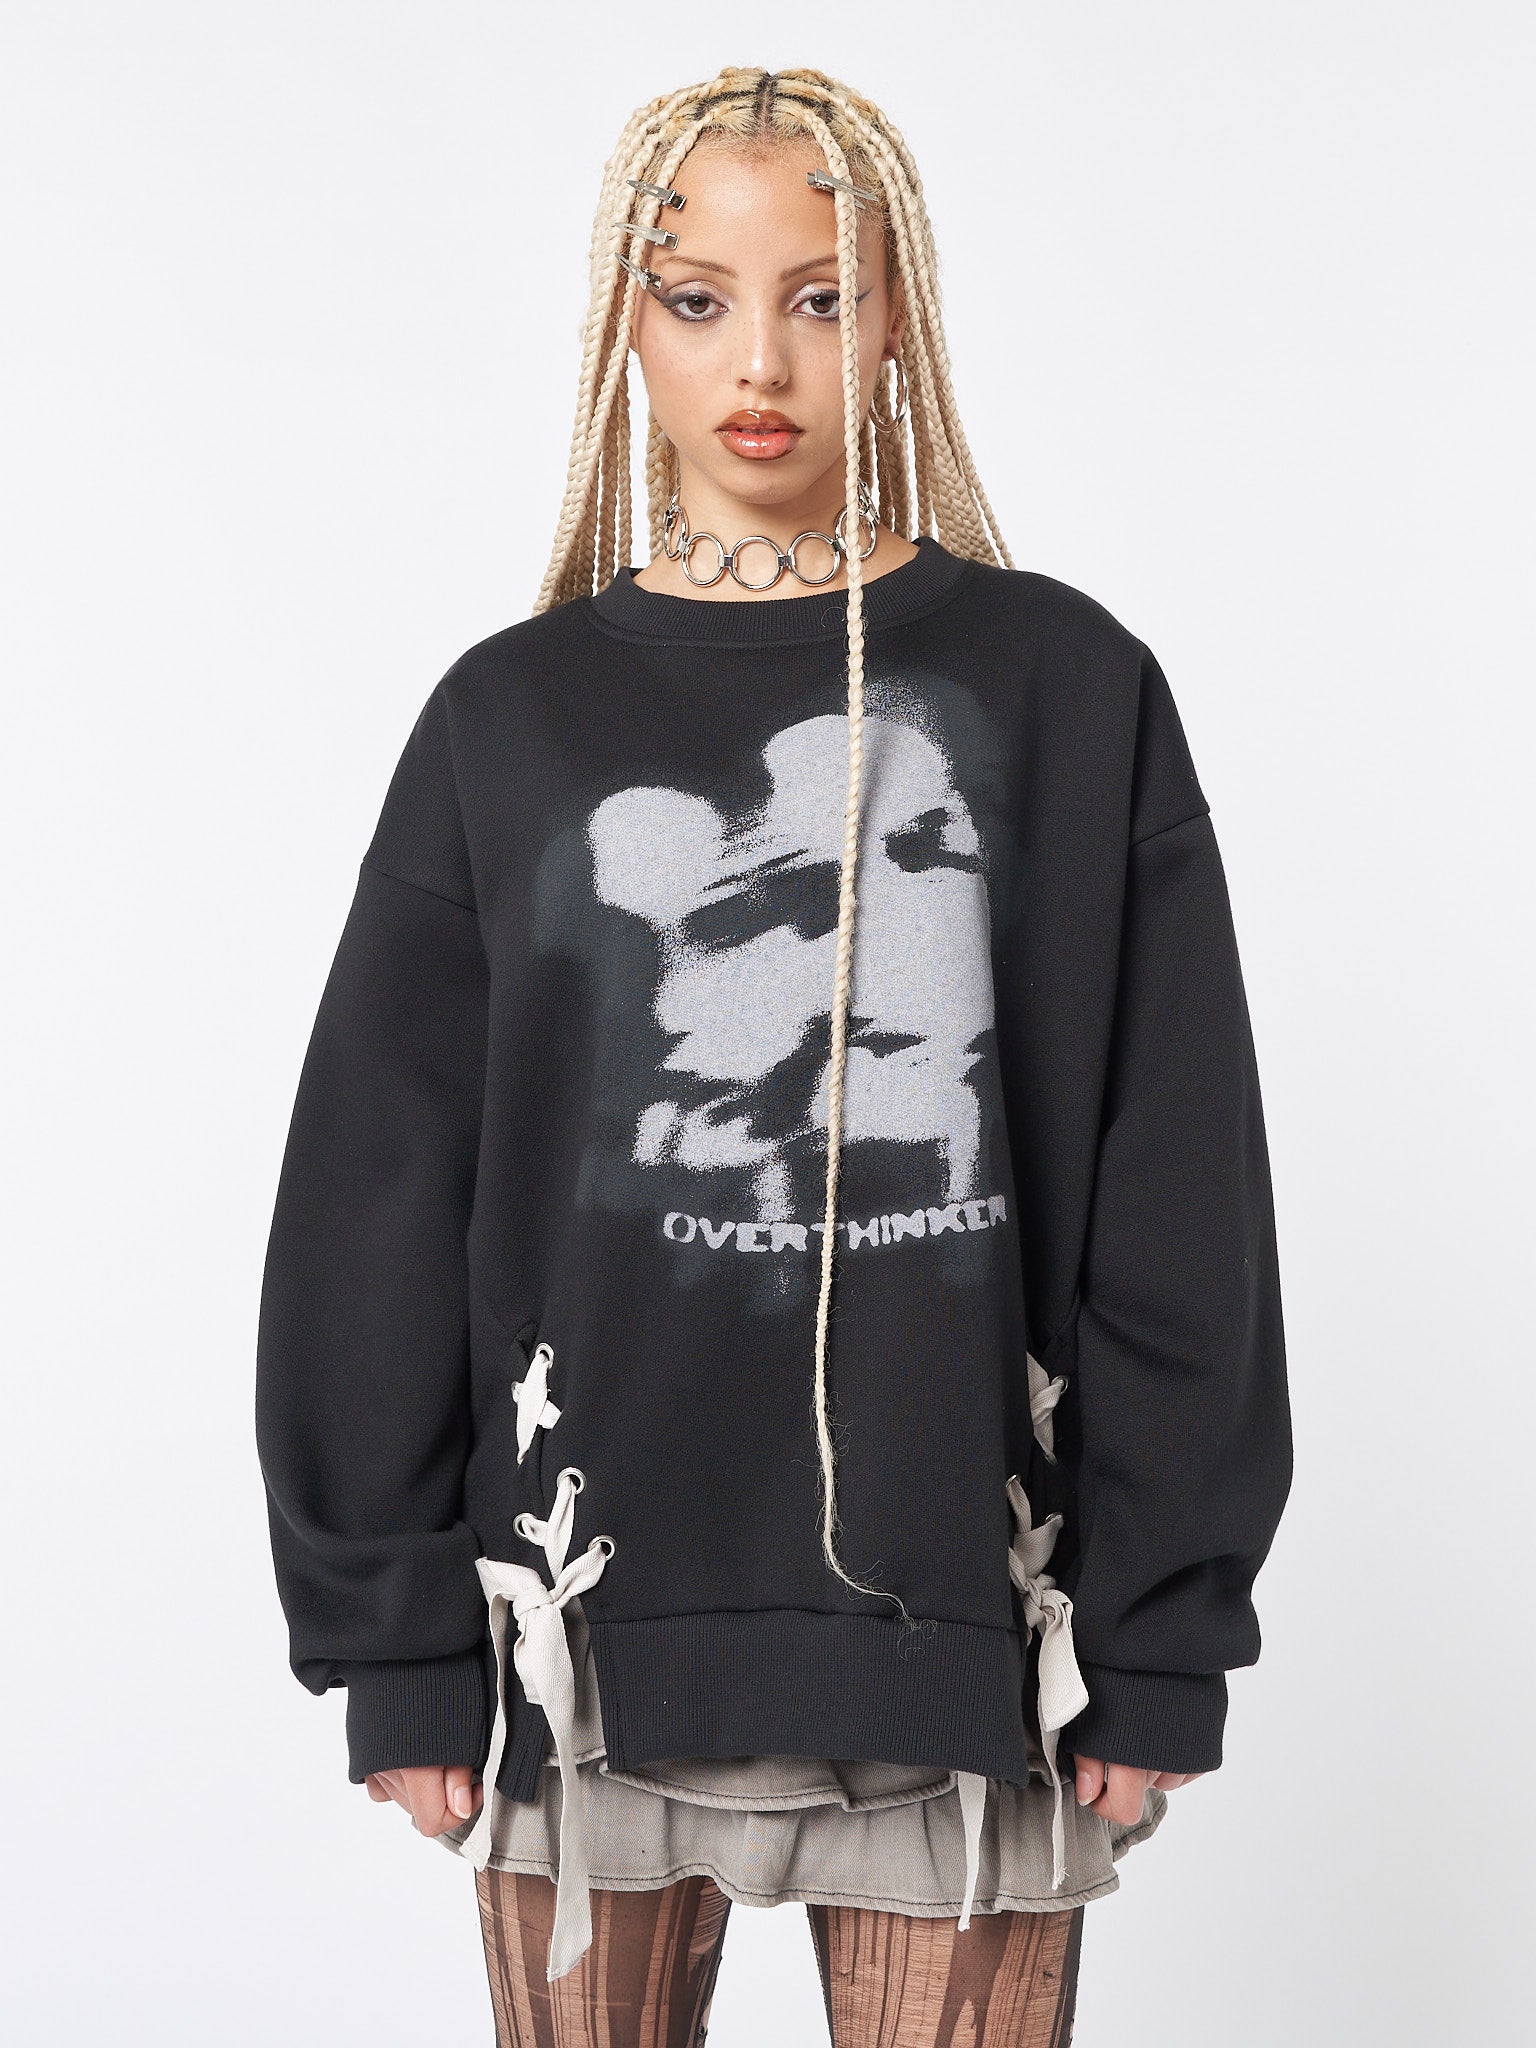 Relaxed sweatshirt in black with contrast lace up details and "Overthinker" graphic screen print